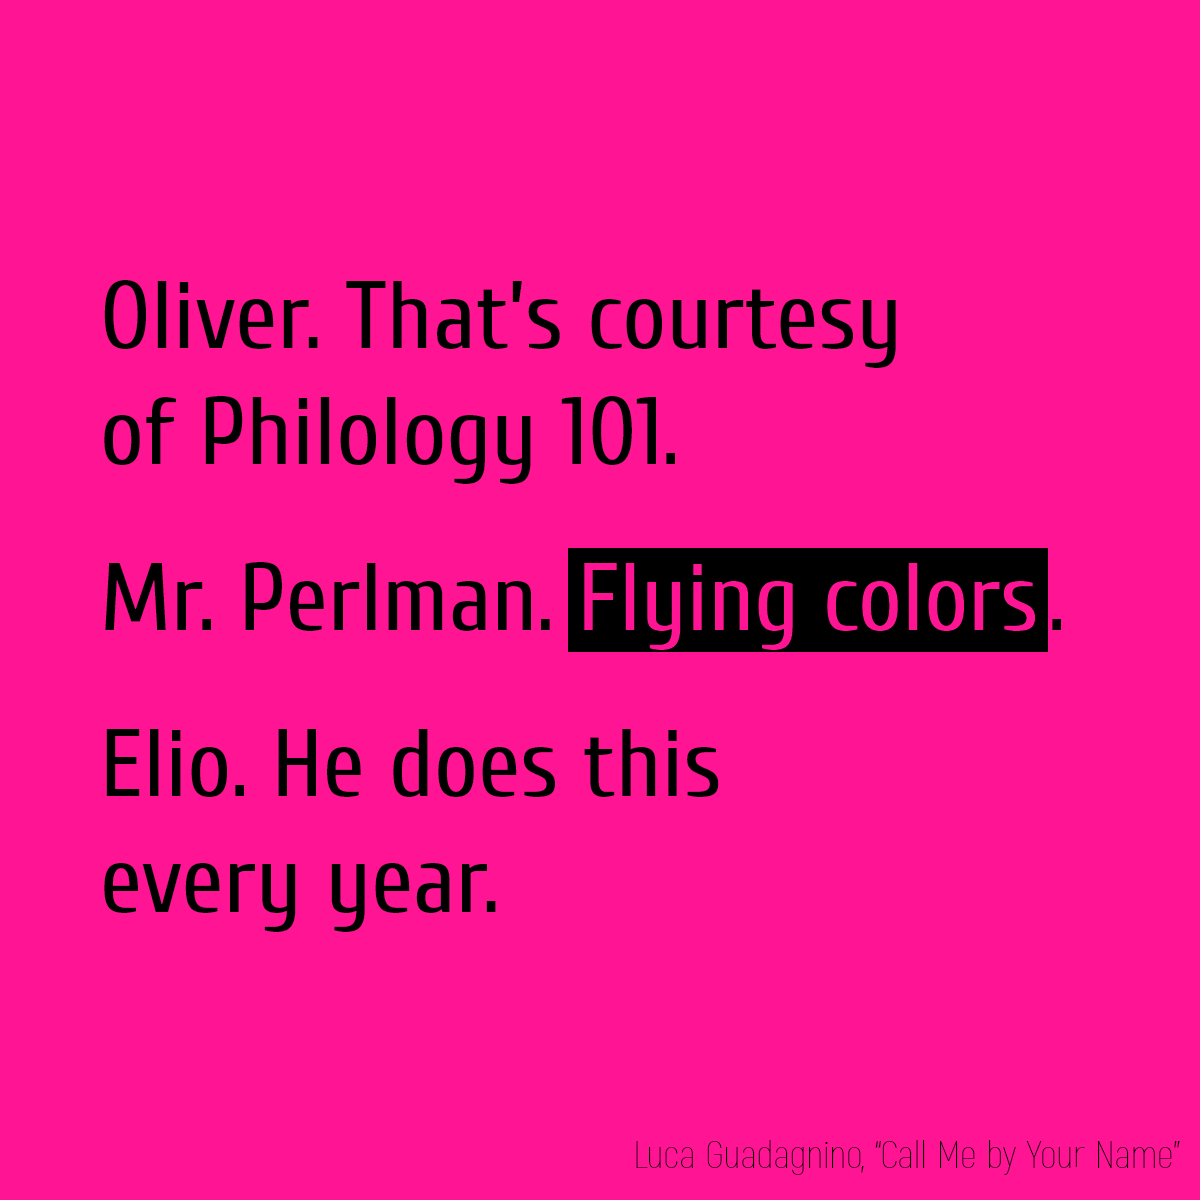 Oliver. That’s courtesy of Philology 101. Mr. Perlman. **Flying colors**. Elio. He does this every year.